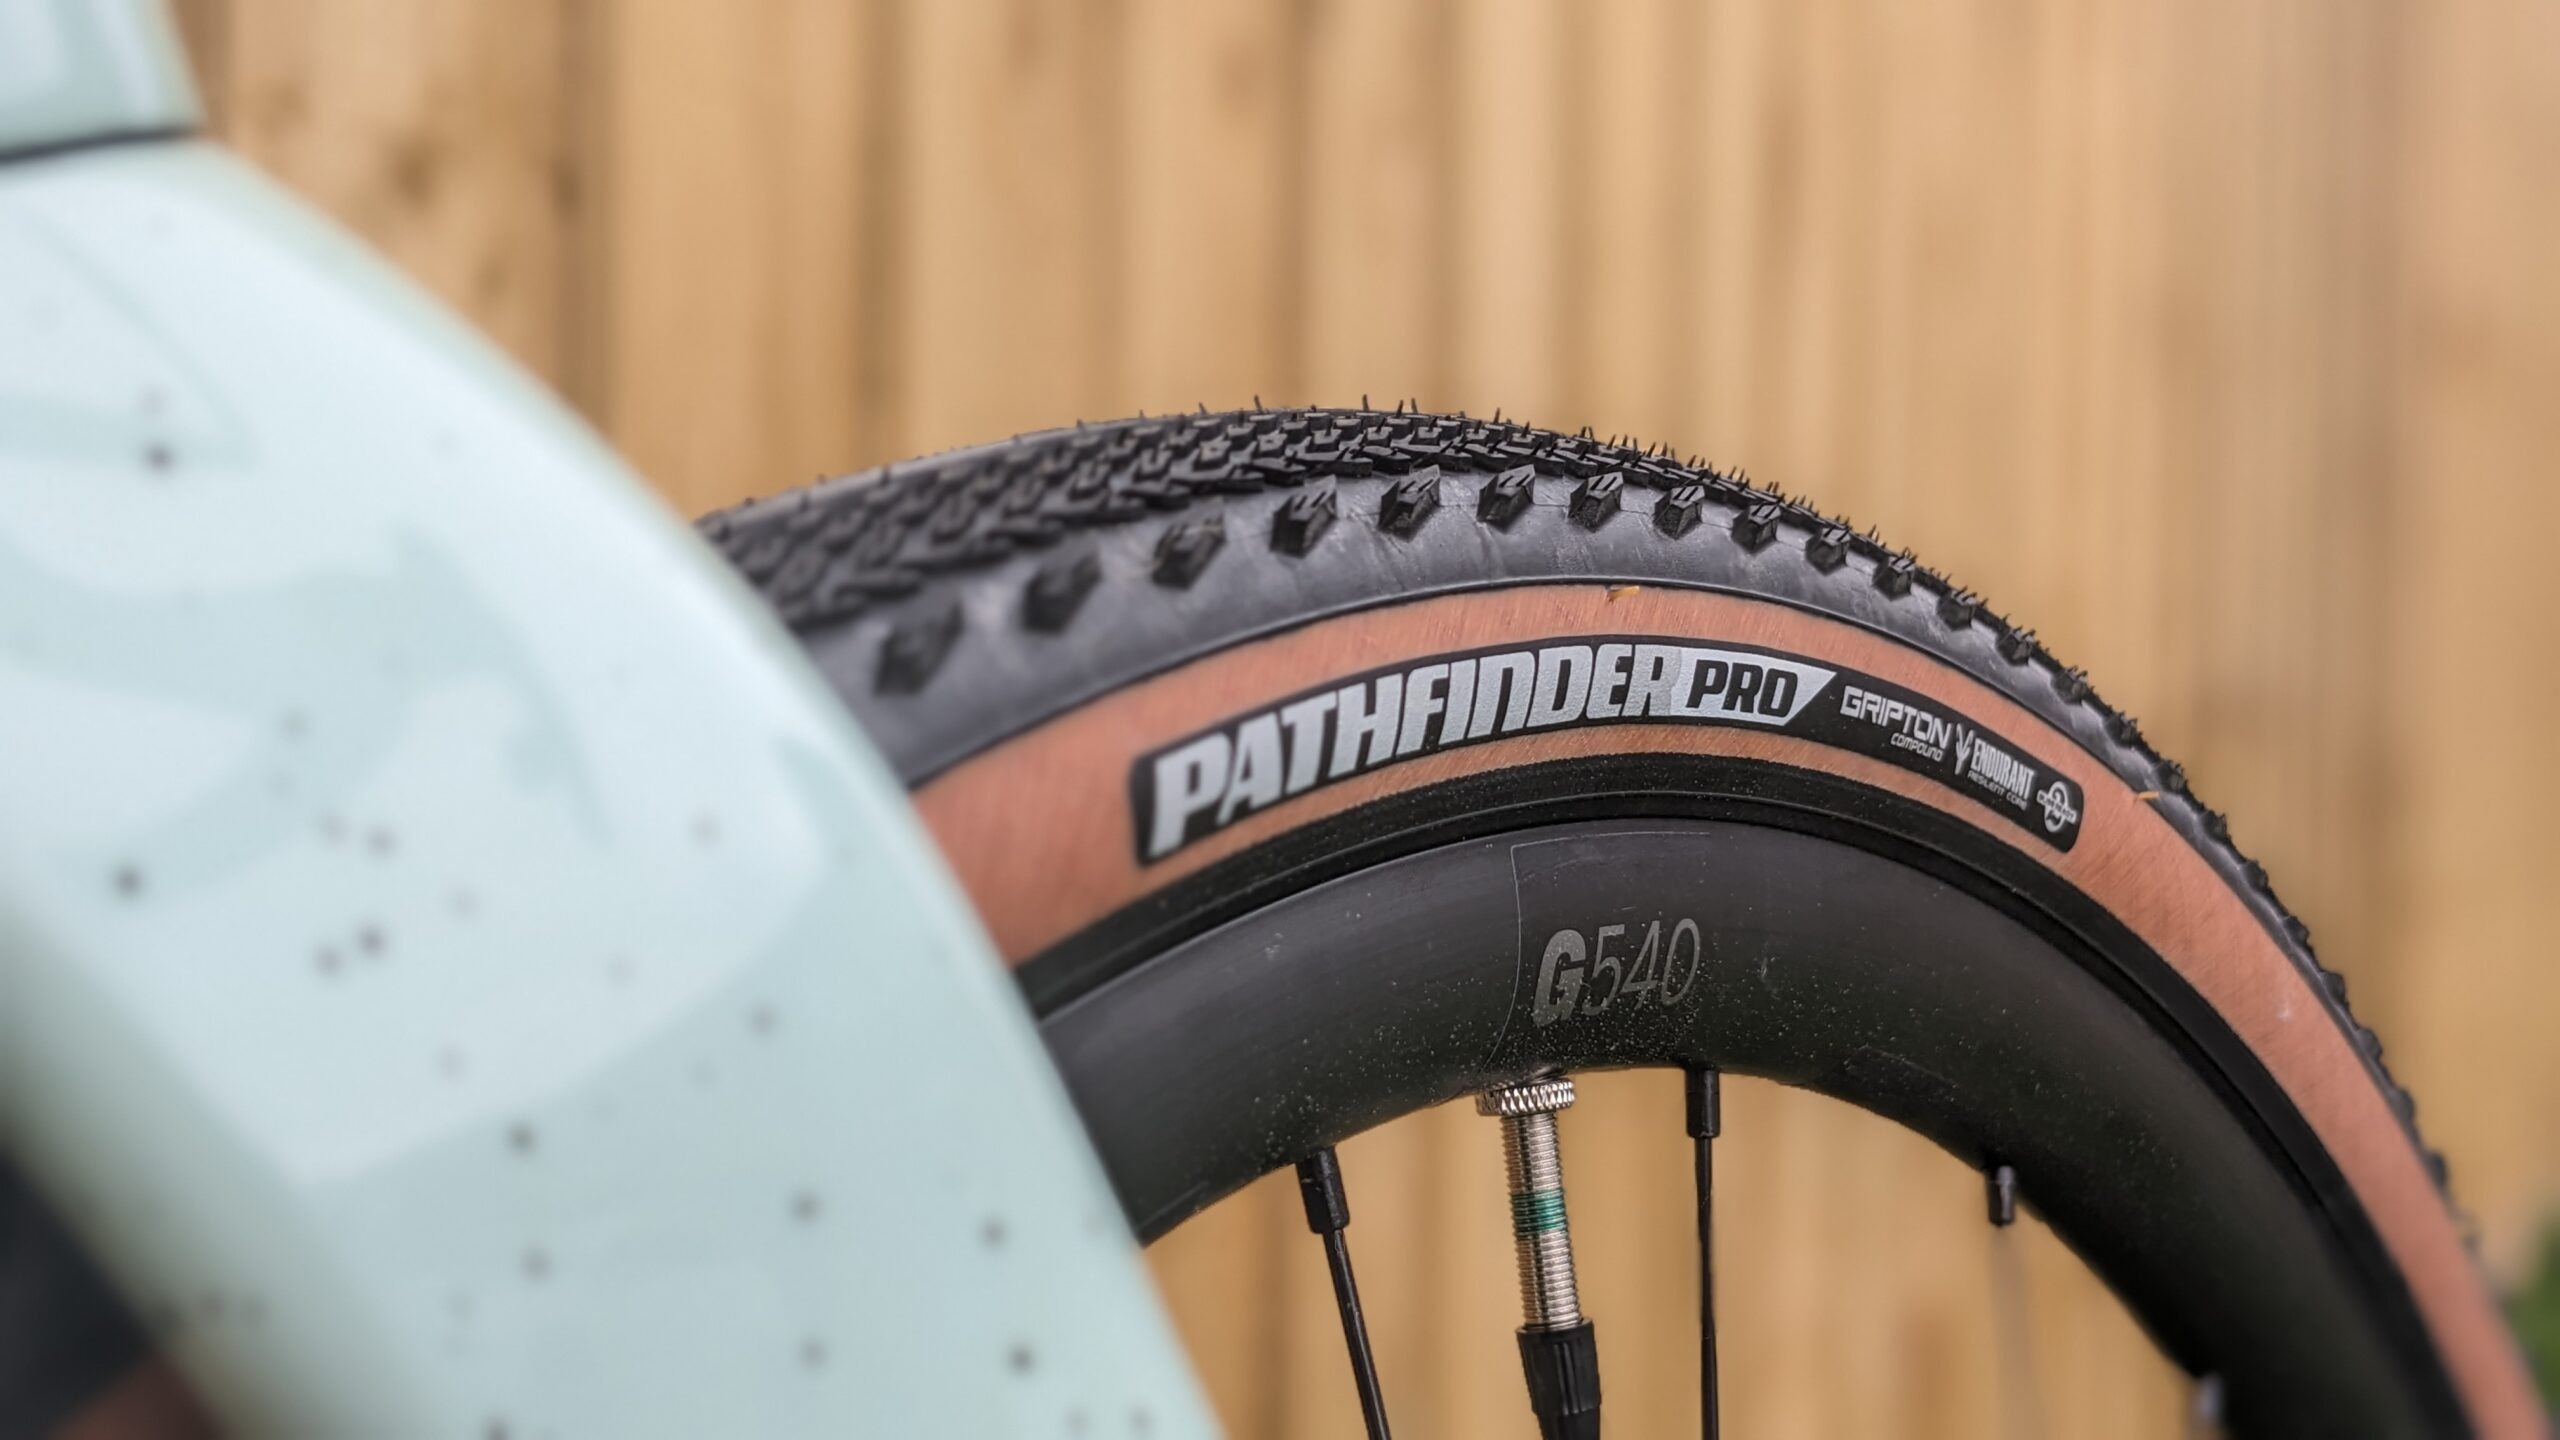 Specialized Pathfinder tubeless tyre